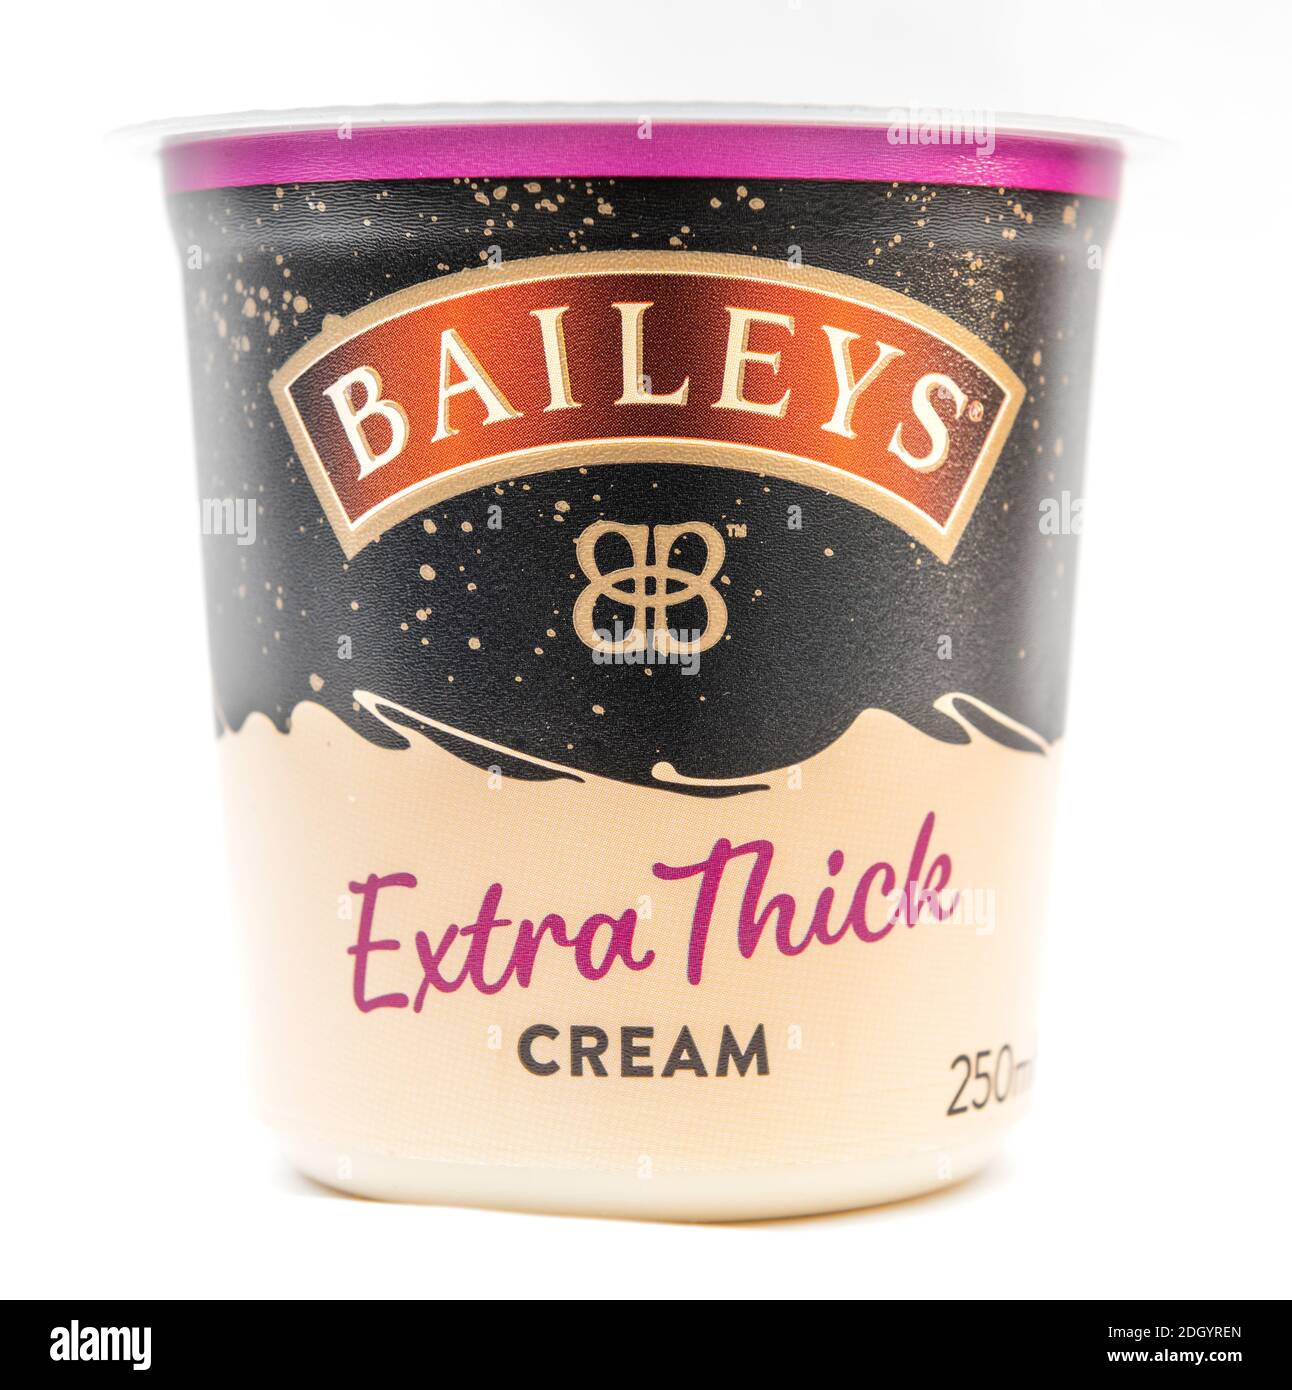 Plastic carton of baileys extra thick cream close up against a white background Stock Photo